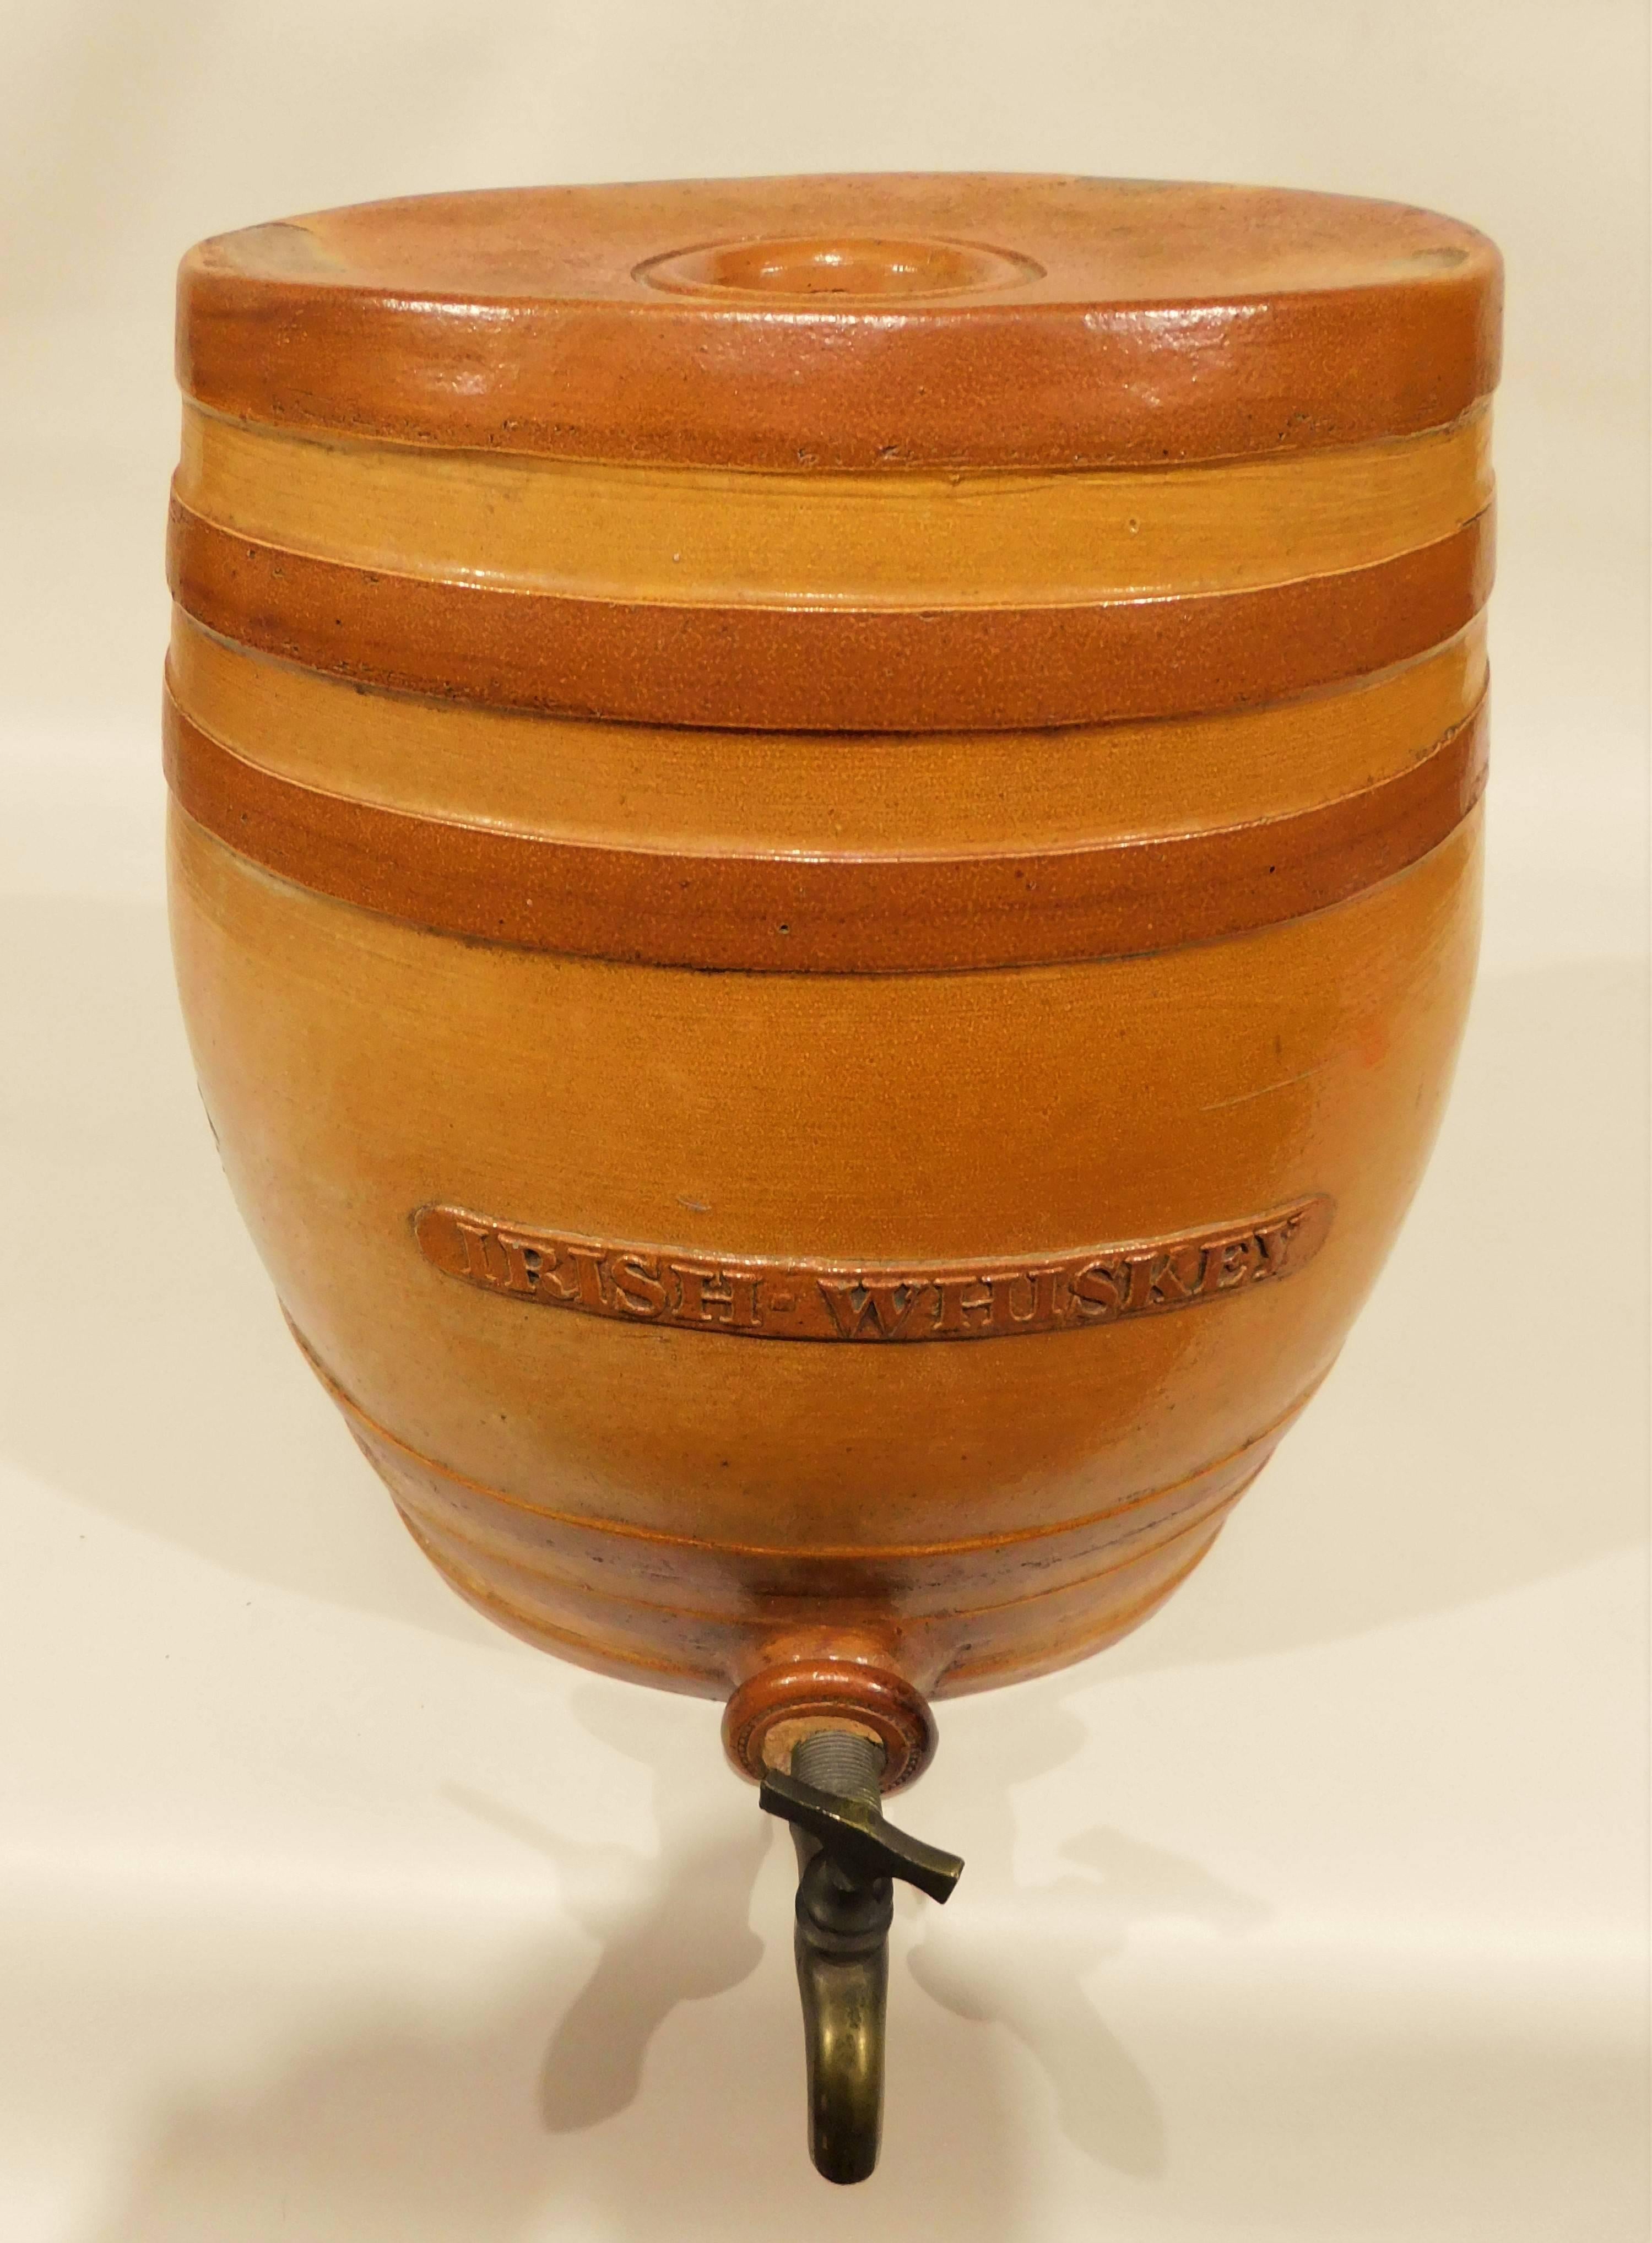 Large 19th century Doulton and Watts, Lambeth pottery, London antique stoneware keg barrel cask Irish whiskey bar liquor dispenser. Bottom has Doulton Lambeth stamped on it with the number two, spigot has Doulton Watts Lambeth pottery on it. Brass